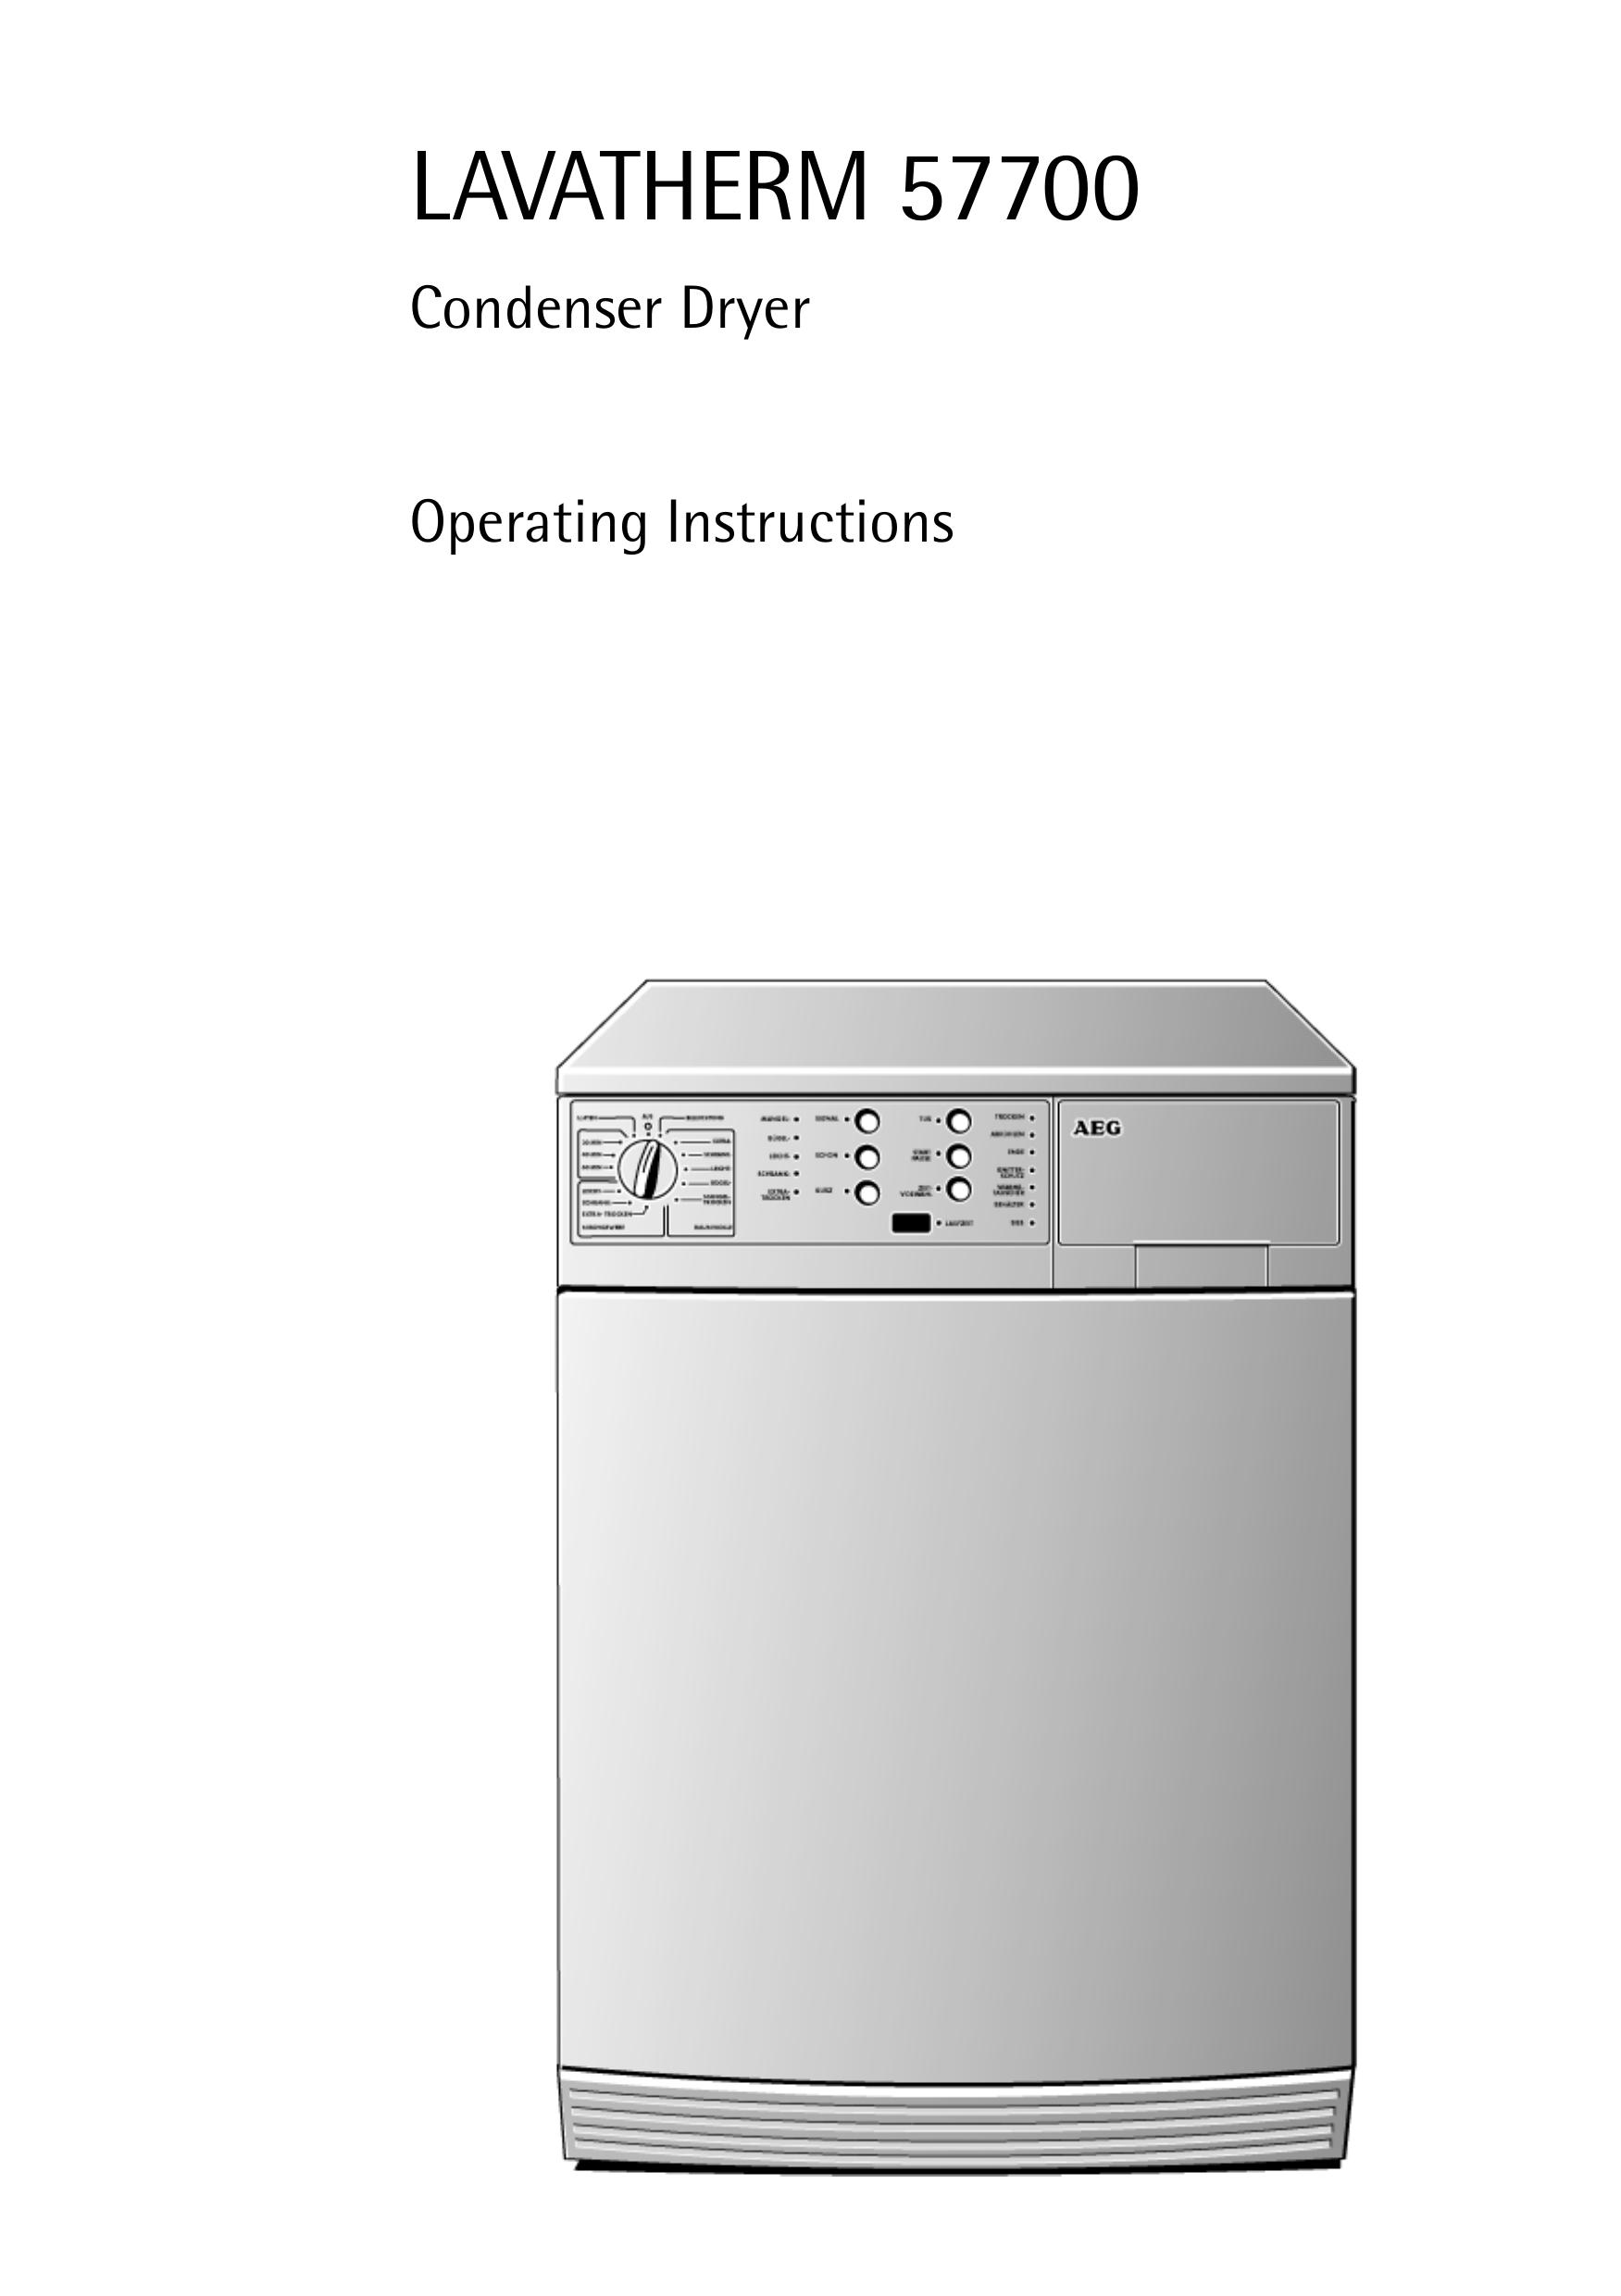 AEG 57700 Clothes Dryer User Manual